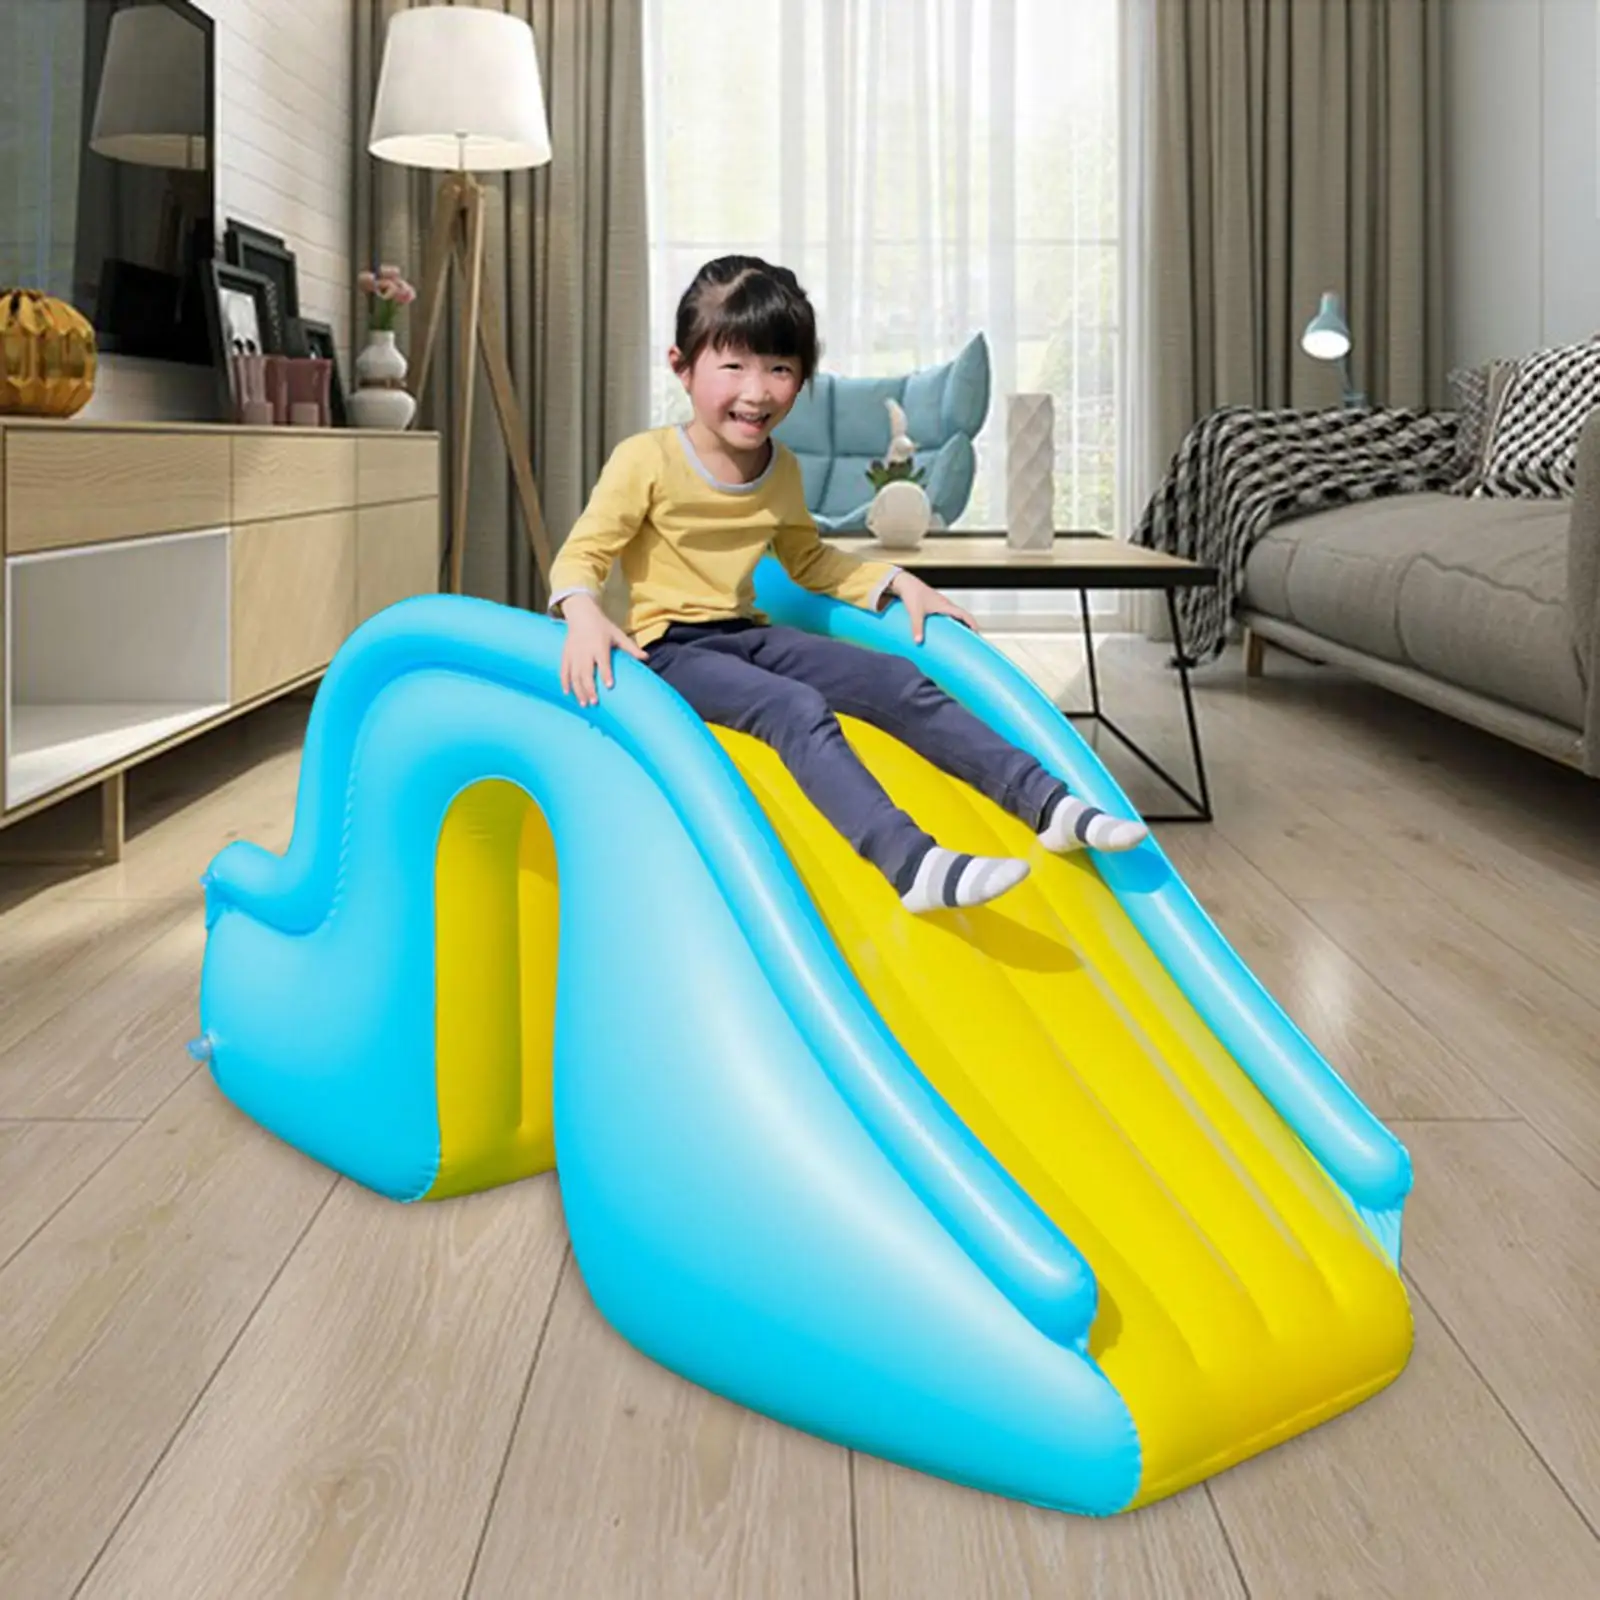 Inflatable Slide Strong Water Park for Water Play Toys Paddling Pool Outdoor